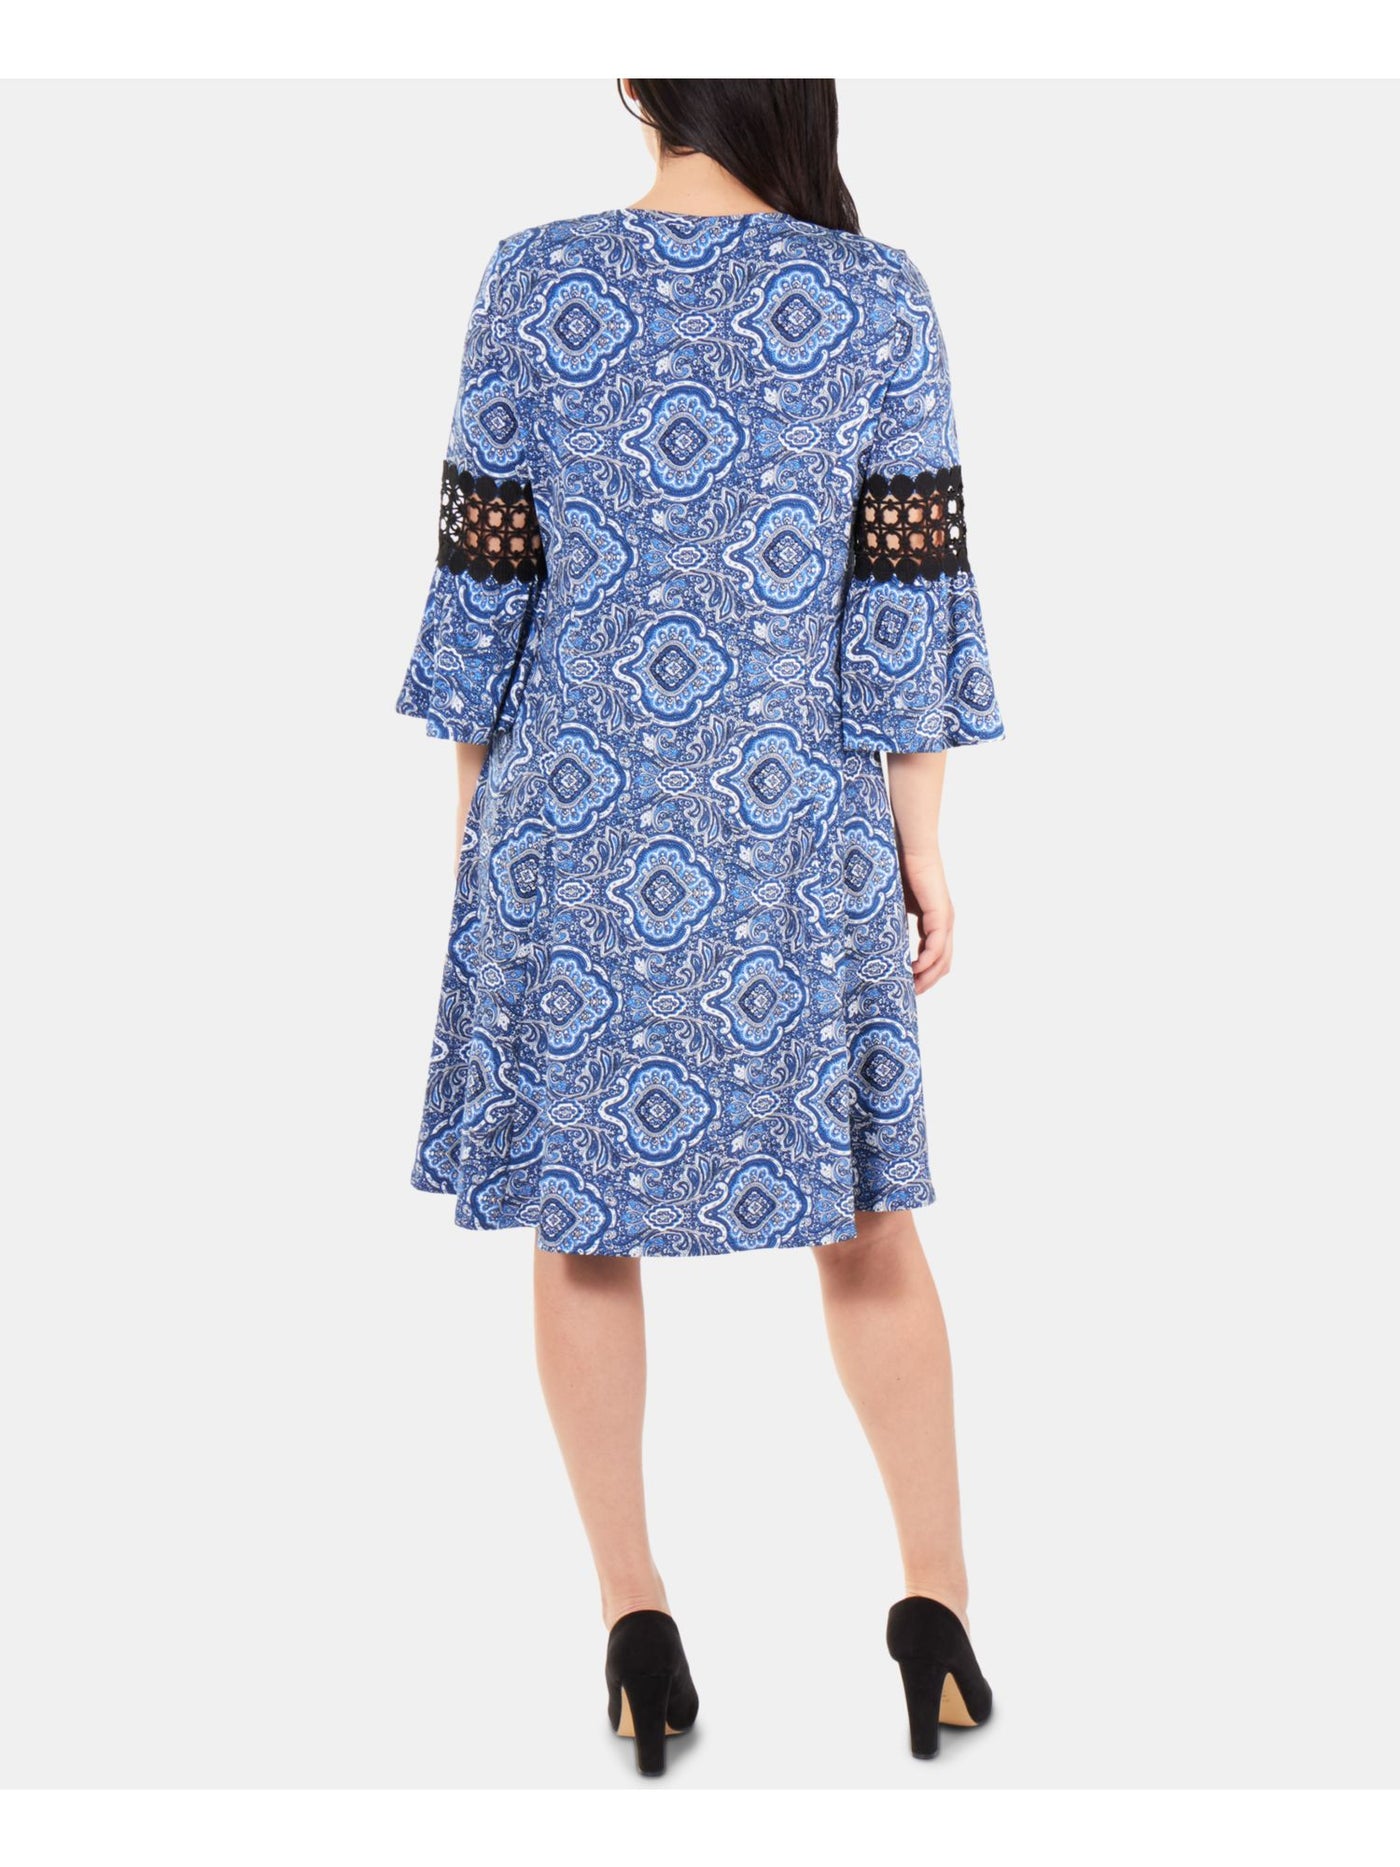 NY COLLECTION Womens Blue Printed Bell Sleeve Jewel Neck Below The Knee Trapeze Dress Petites PXS